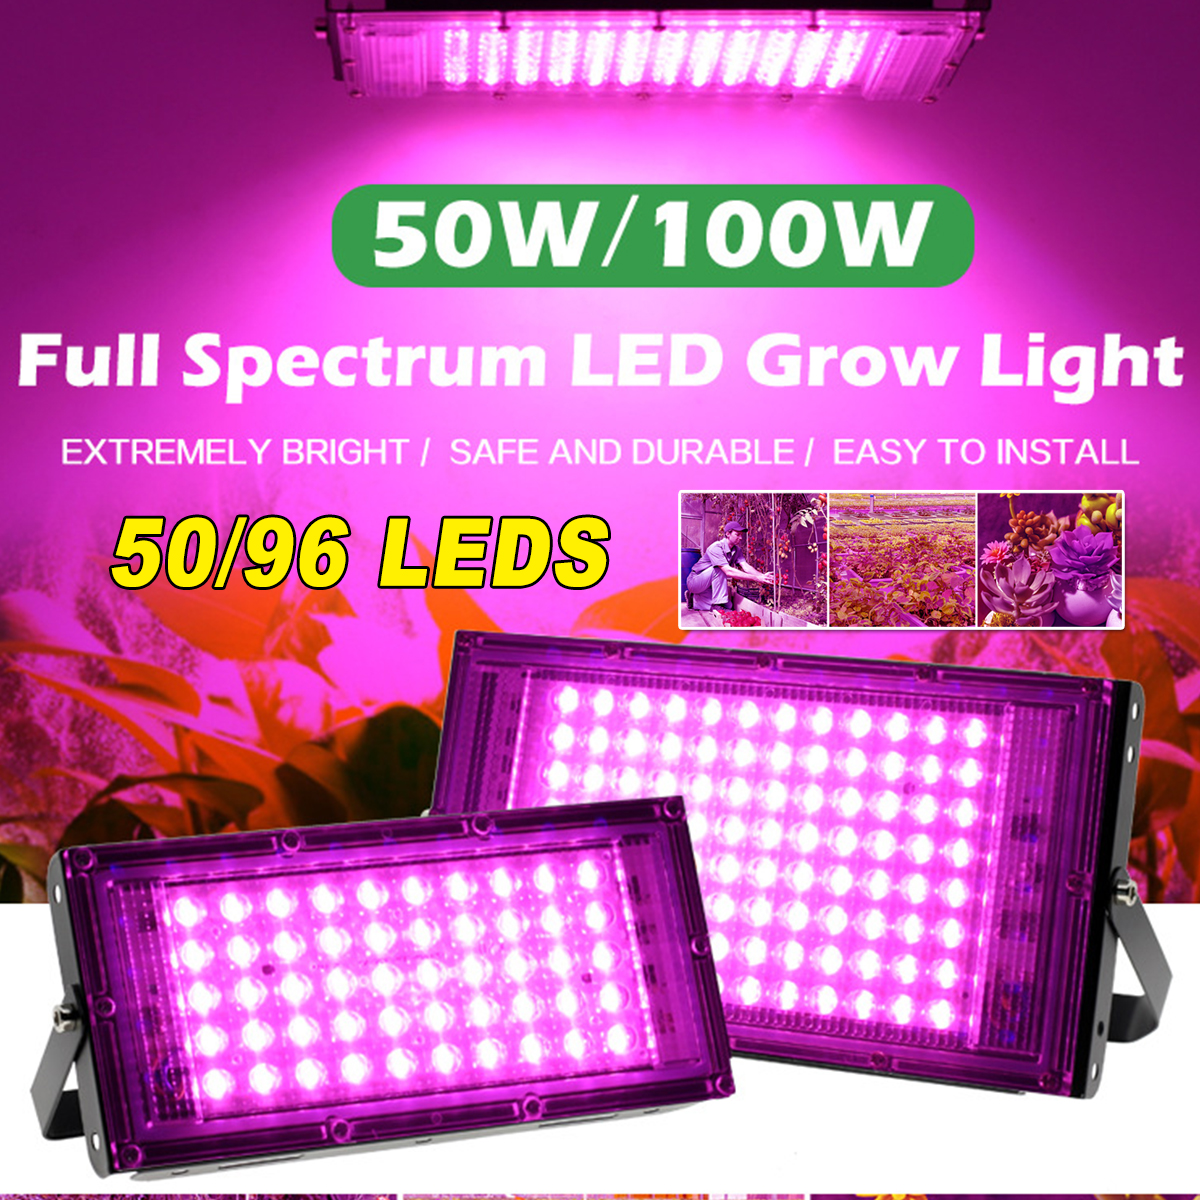 50100W-5096LED-220V-Full-Spectrum-Grow-Light-Plant-Growing-Lamp-Lights-With-Clip-For-Indoor-Plants-1800271-2